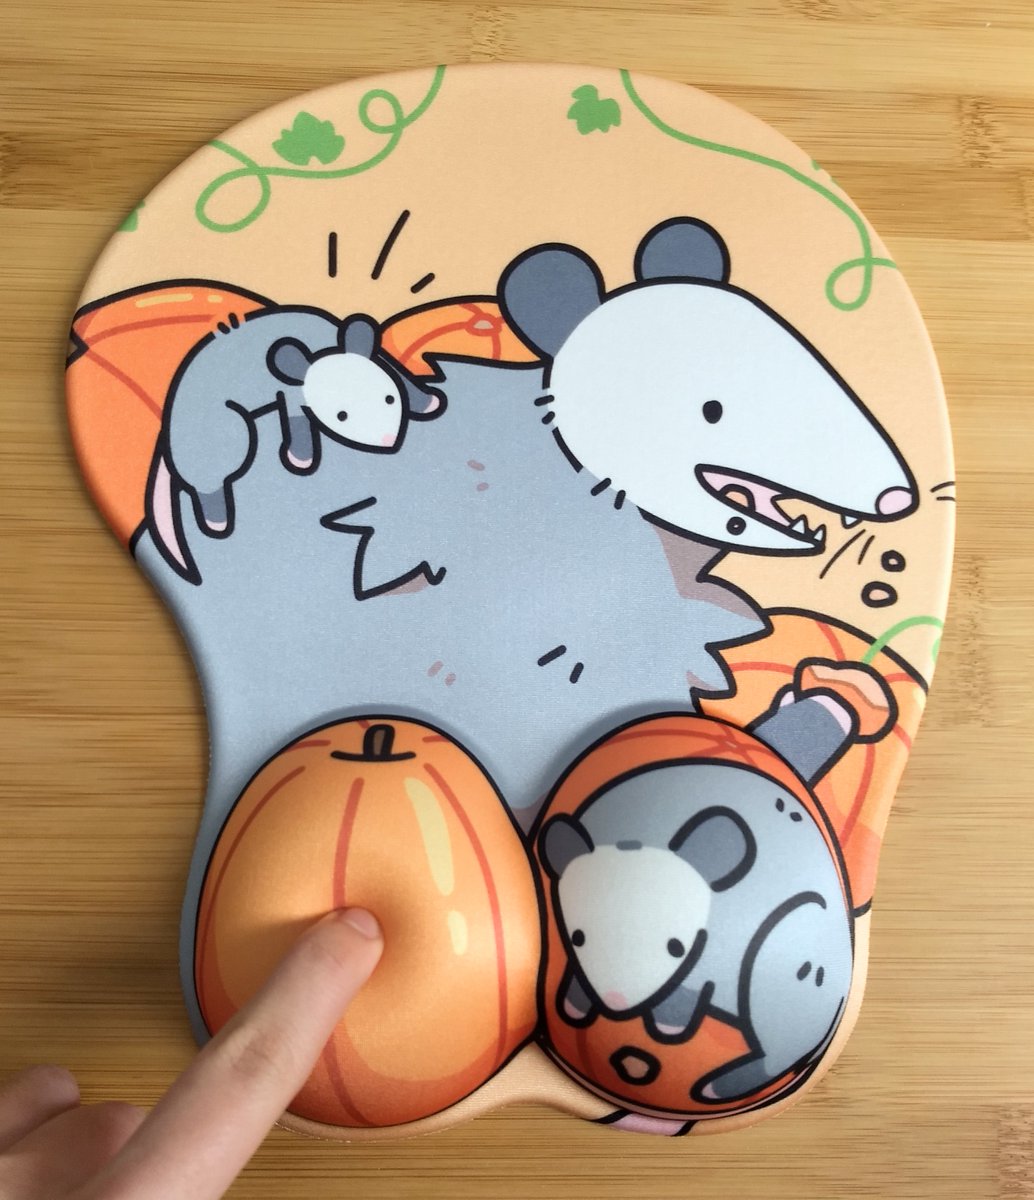 「Squishy mousepads are back btw :3 」|Crow 🌱 Promise Garden!のイラスト